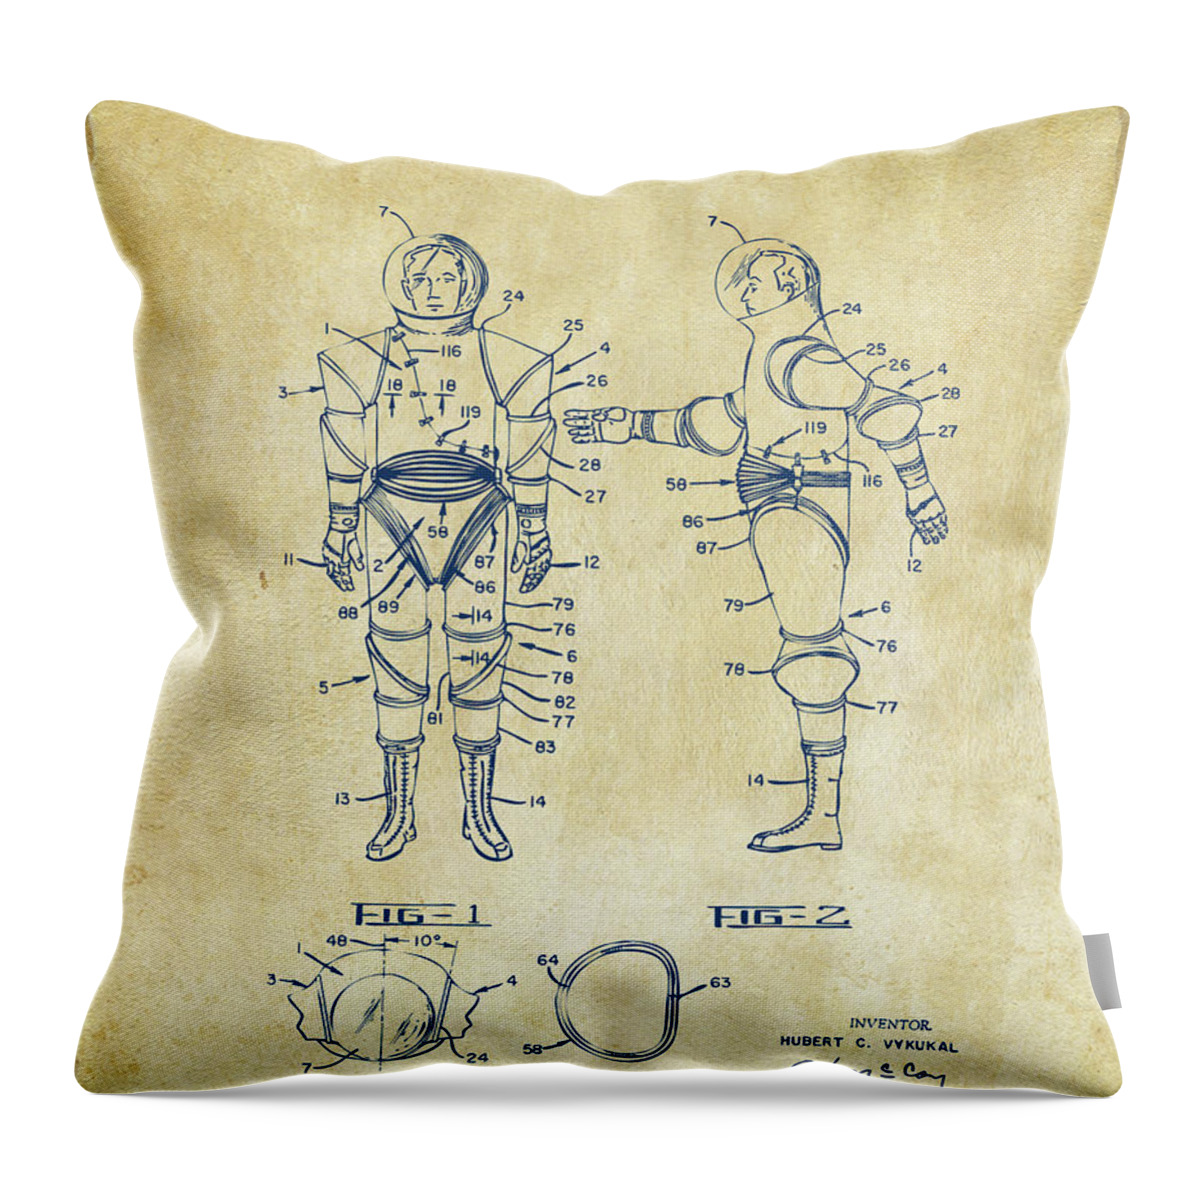 Space Suit Throw Pillow featuring the digital art Astronaut Space Suit Patent 1968 - Vintage by Nikki Marie Smith